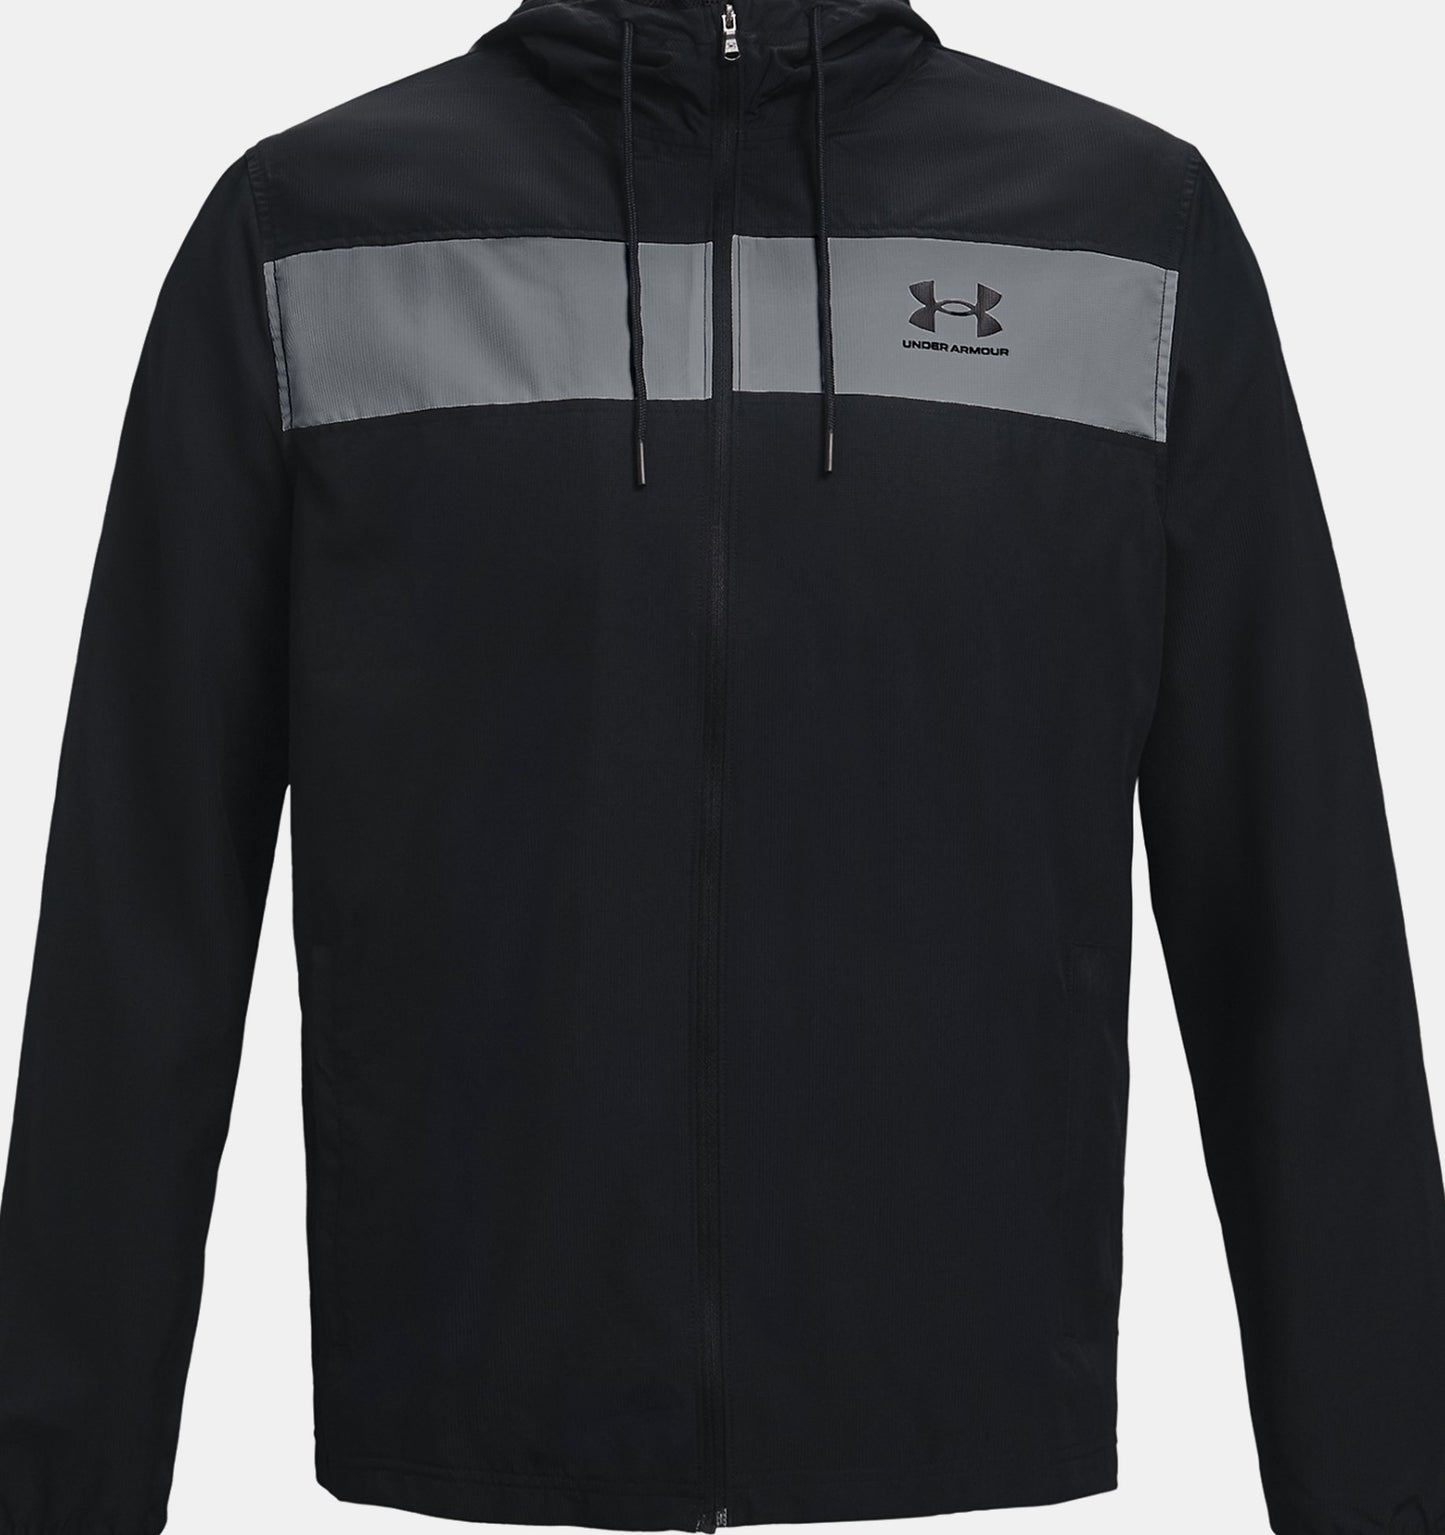 Under Armour Wind Breaker Jacket Black – The Hype Store